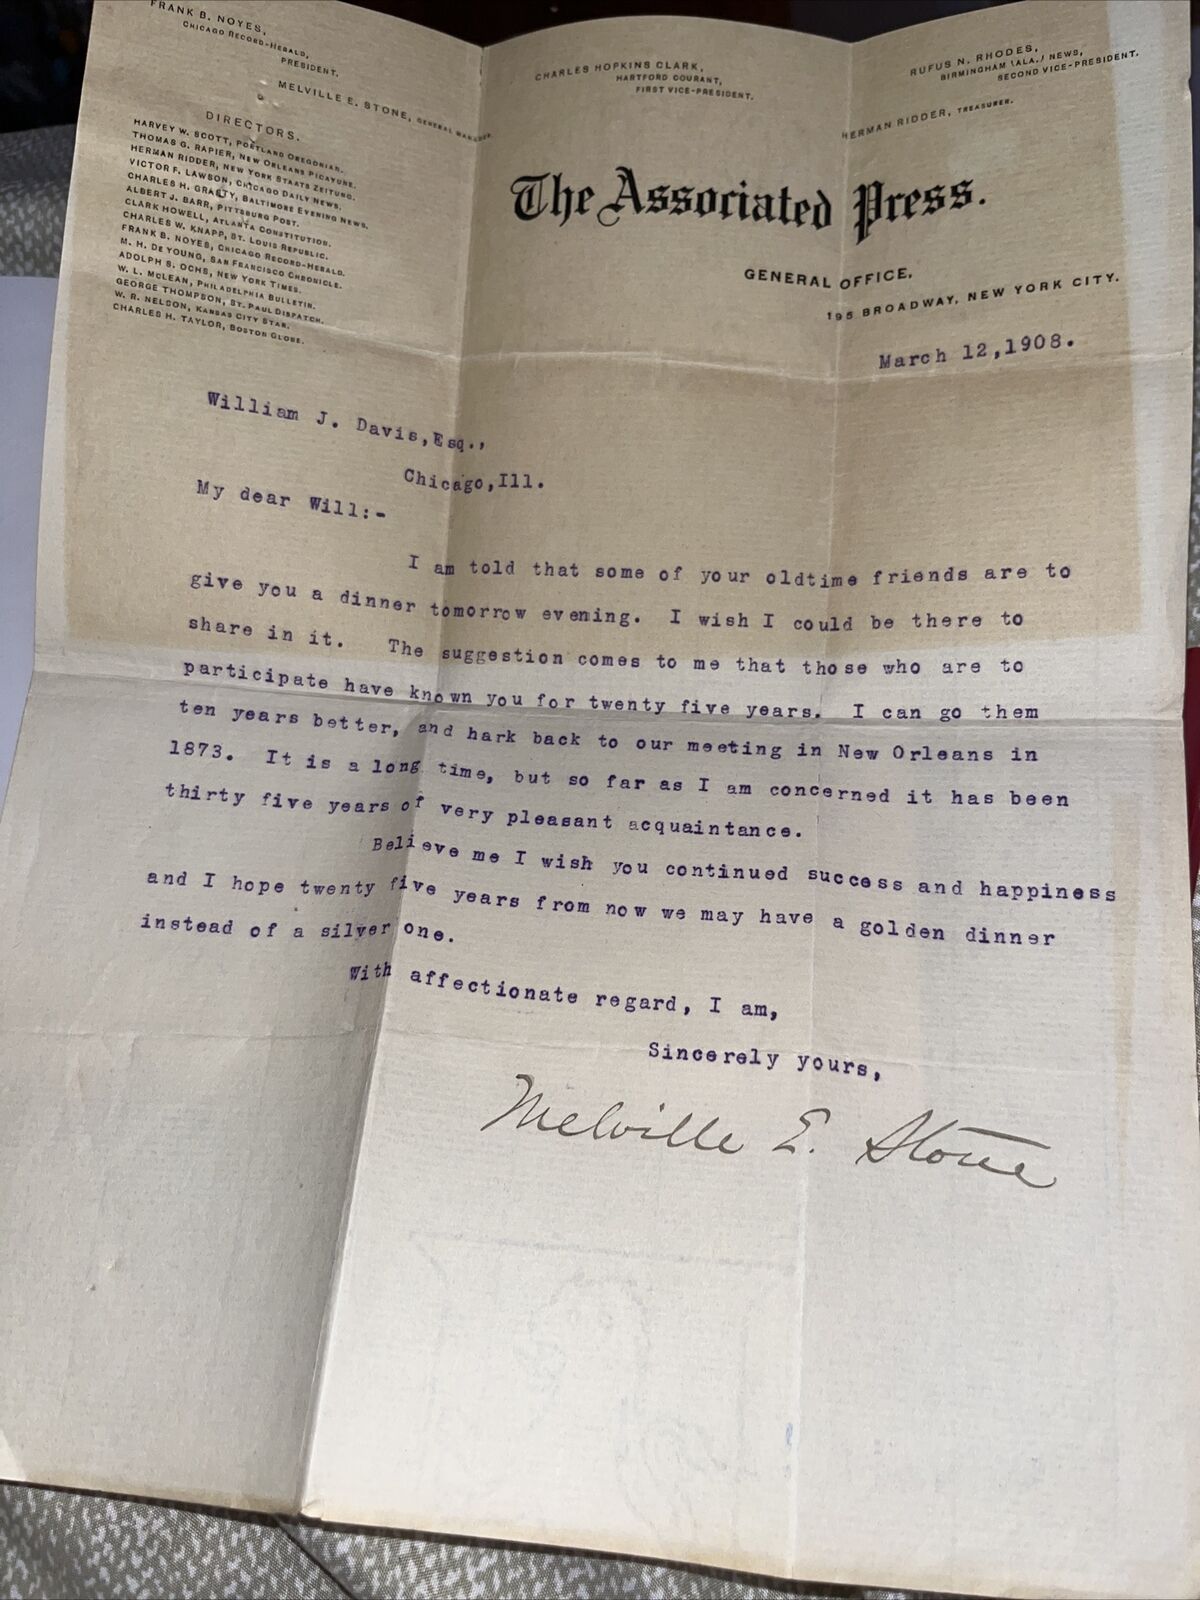 1908 Letter by Melville Stone Chicago Daily News Founder - Associated Press